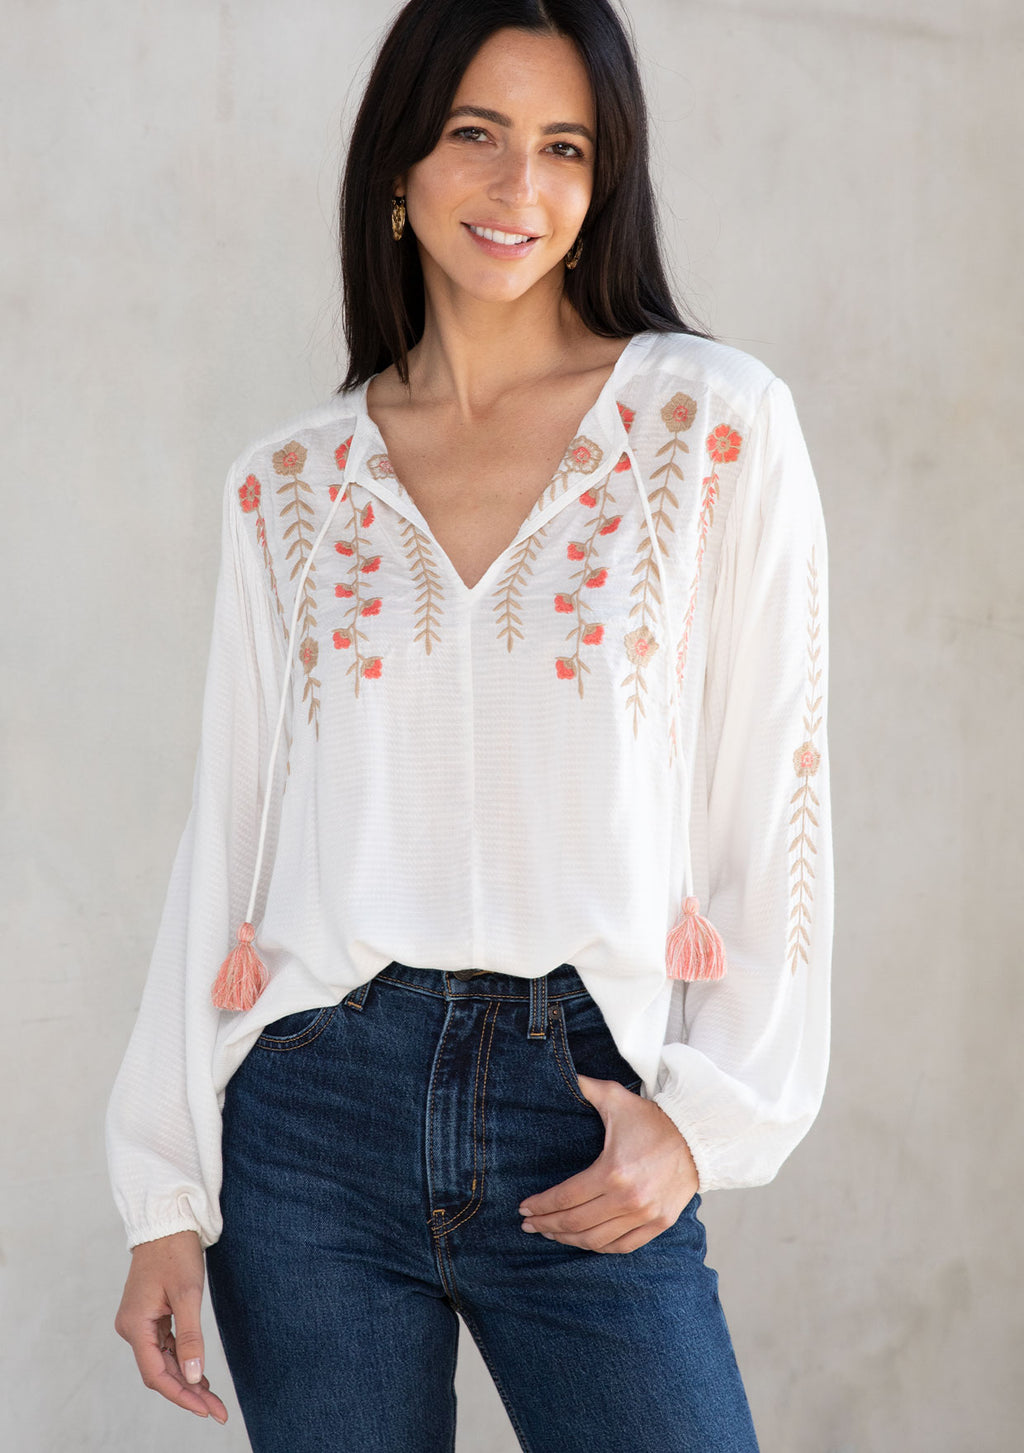 Women's Top - Boho Embroidered Peasant Top